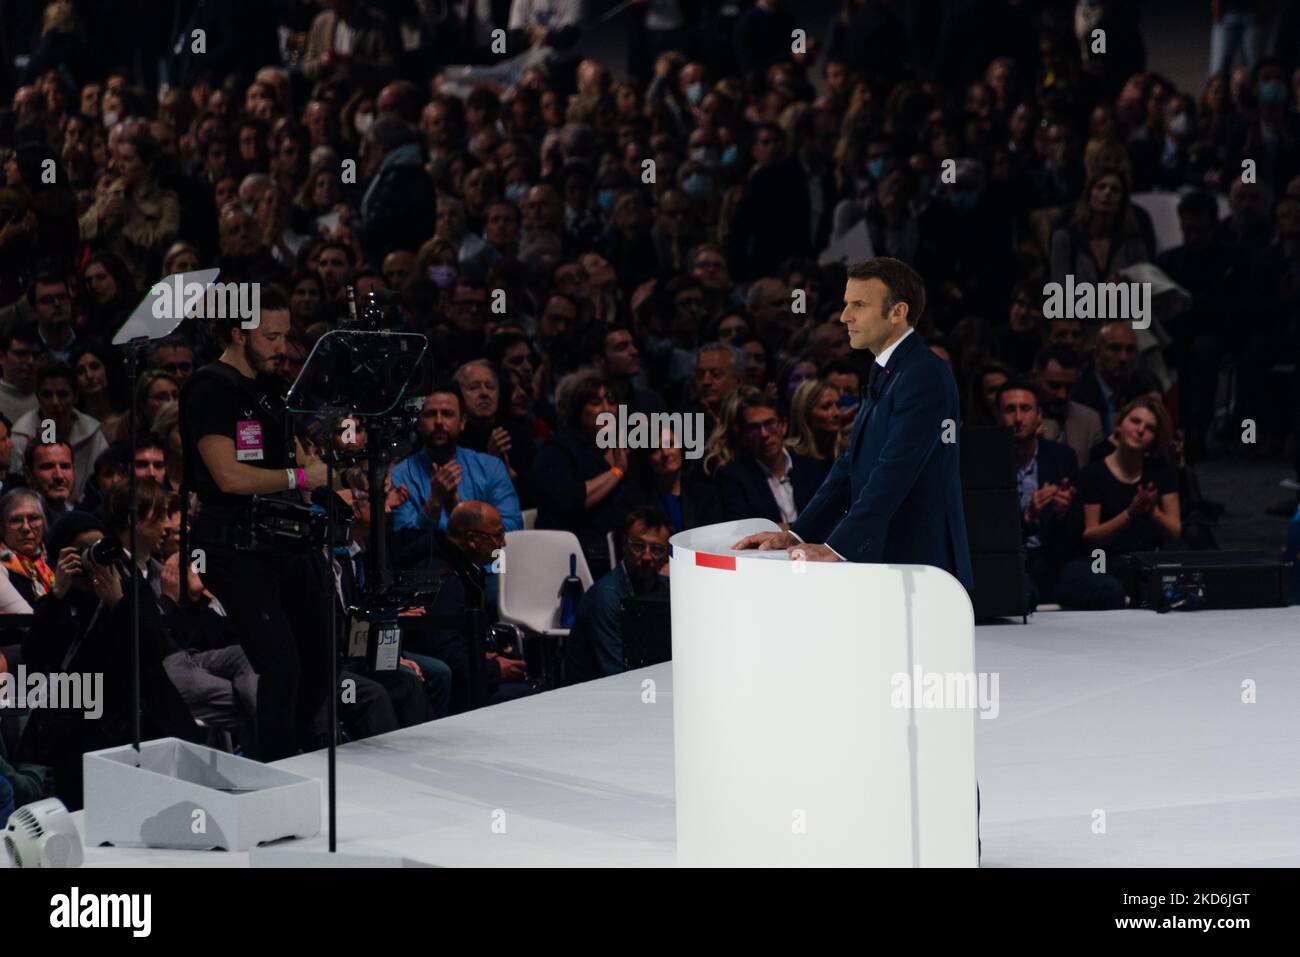 French President and candidate for his own re-election of the liberal party La République en Marche (LREM), Emmanuel Macron, speaks during his first campaign rally held at the U Arena in Paris La Défense in front of several thousand supporters and members of his government, in Nanterre, a suburb of Paris, April 2, 2022. (Photo by Samuel Boivin/NurPhoto) Stock Photo